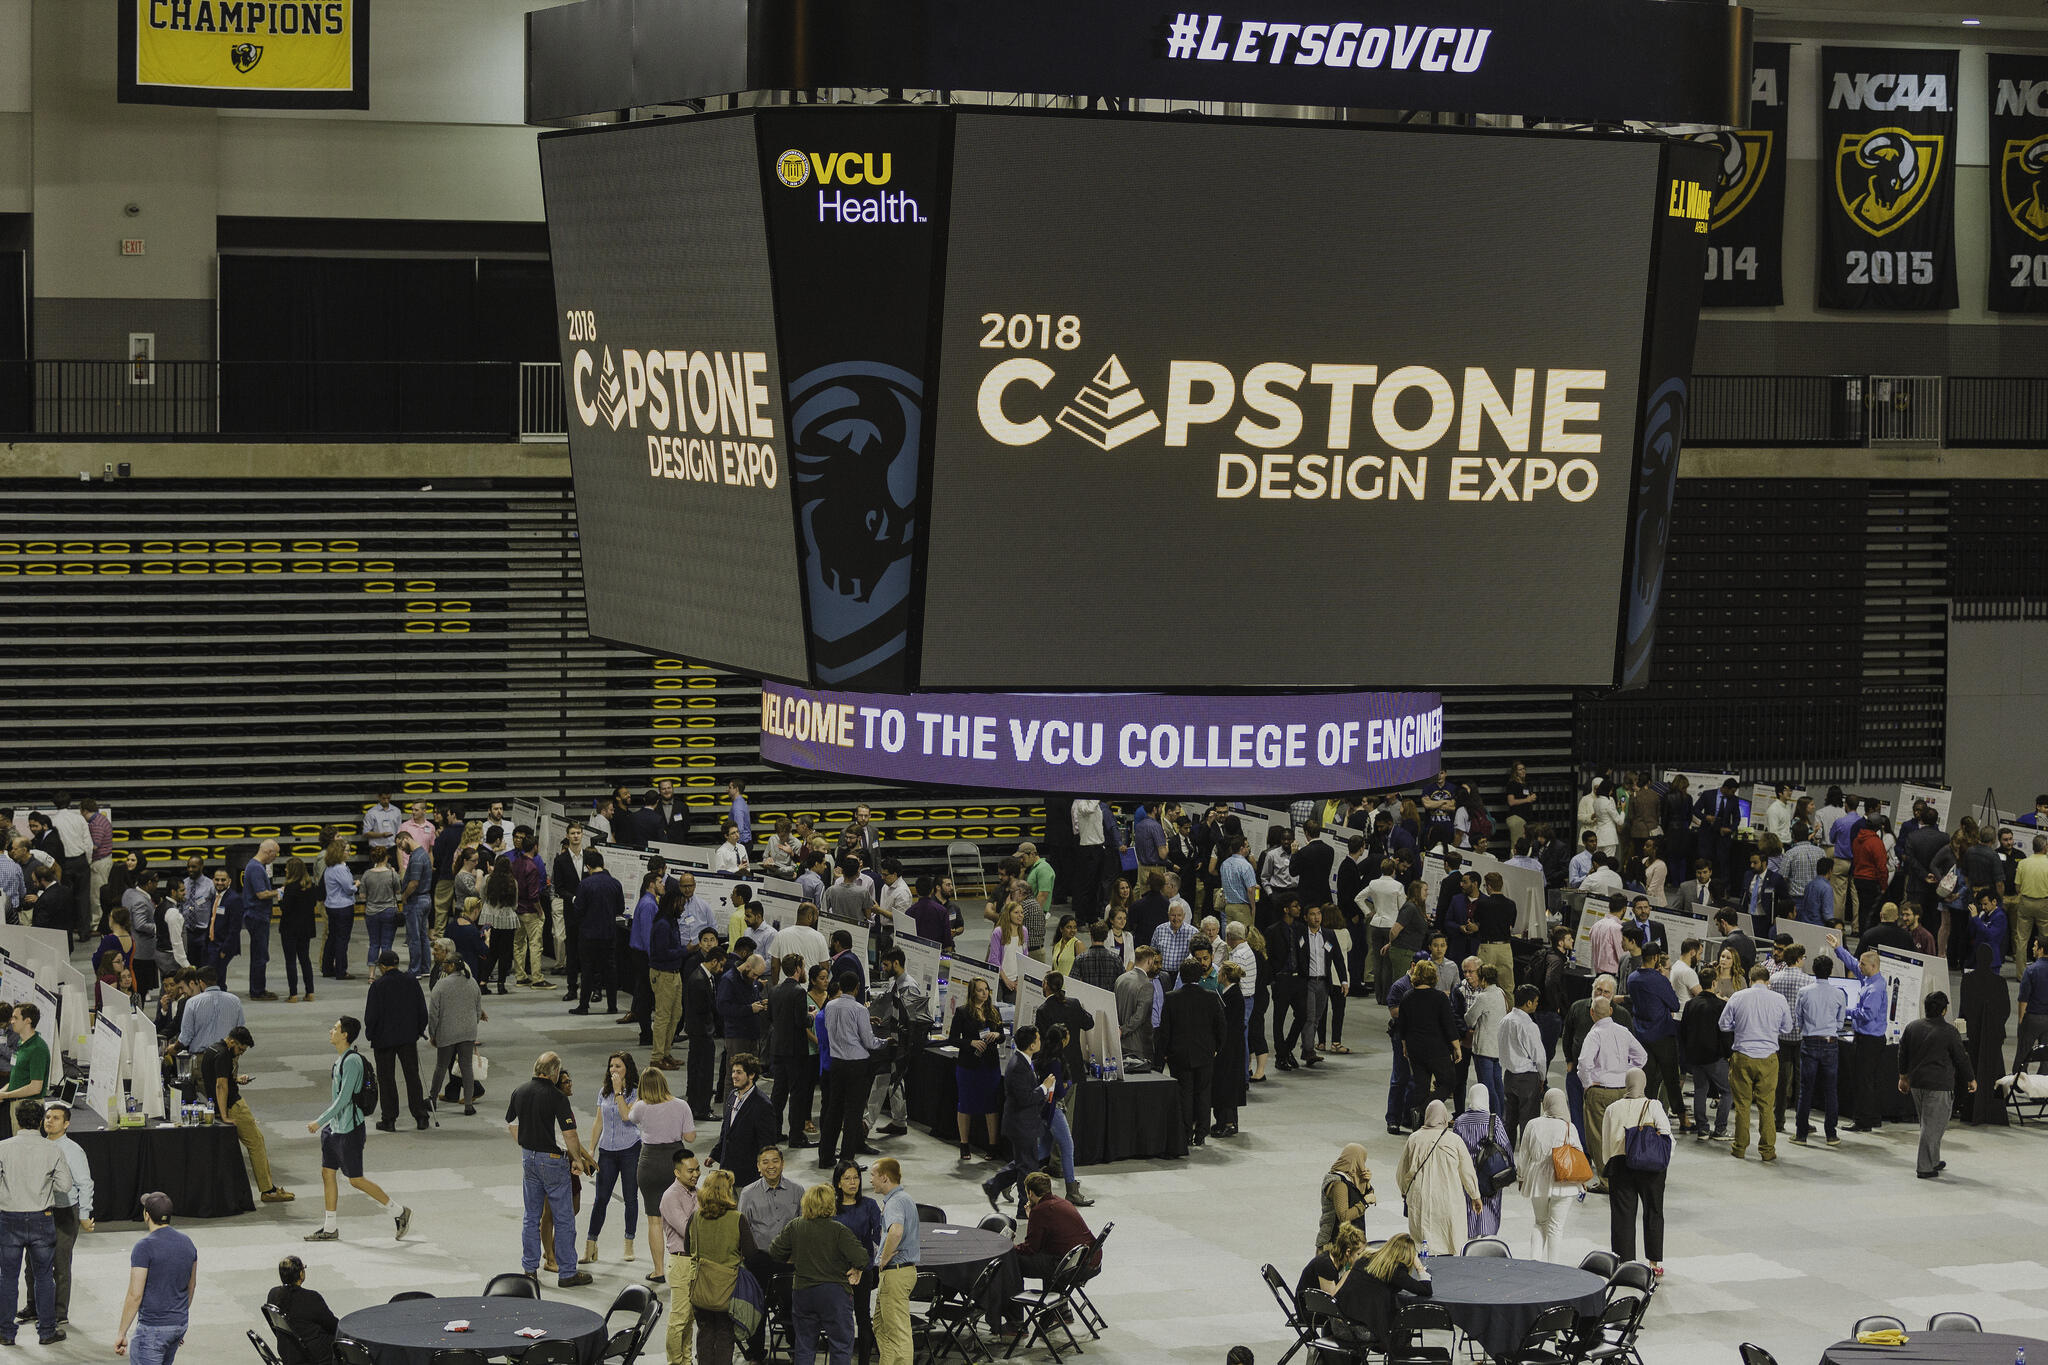 Engineering students and faculty, local school children and members of the local engineering community gather at the Seigel Center for the 2018 Capstone Design Expo. 